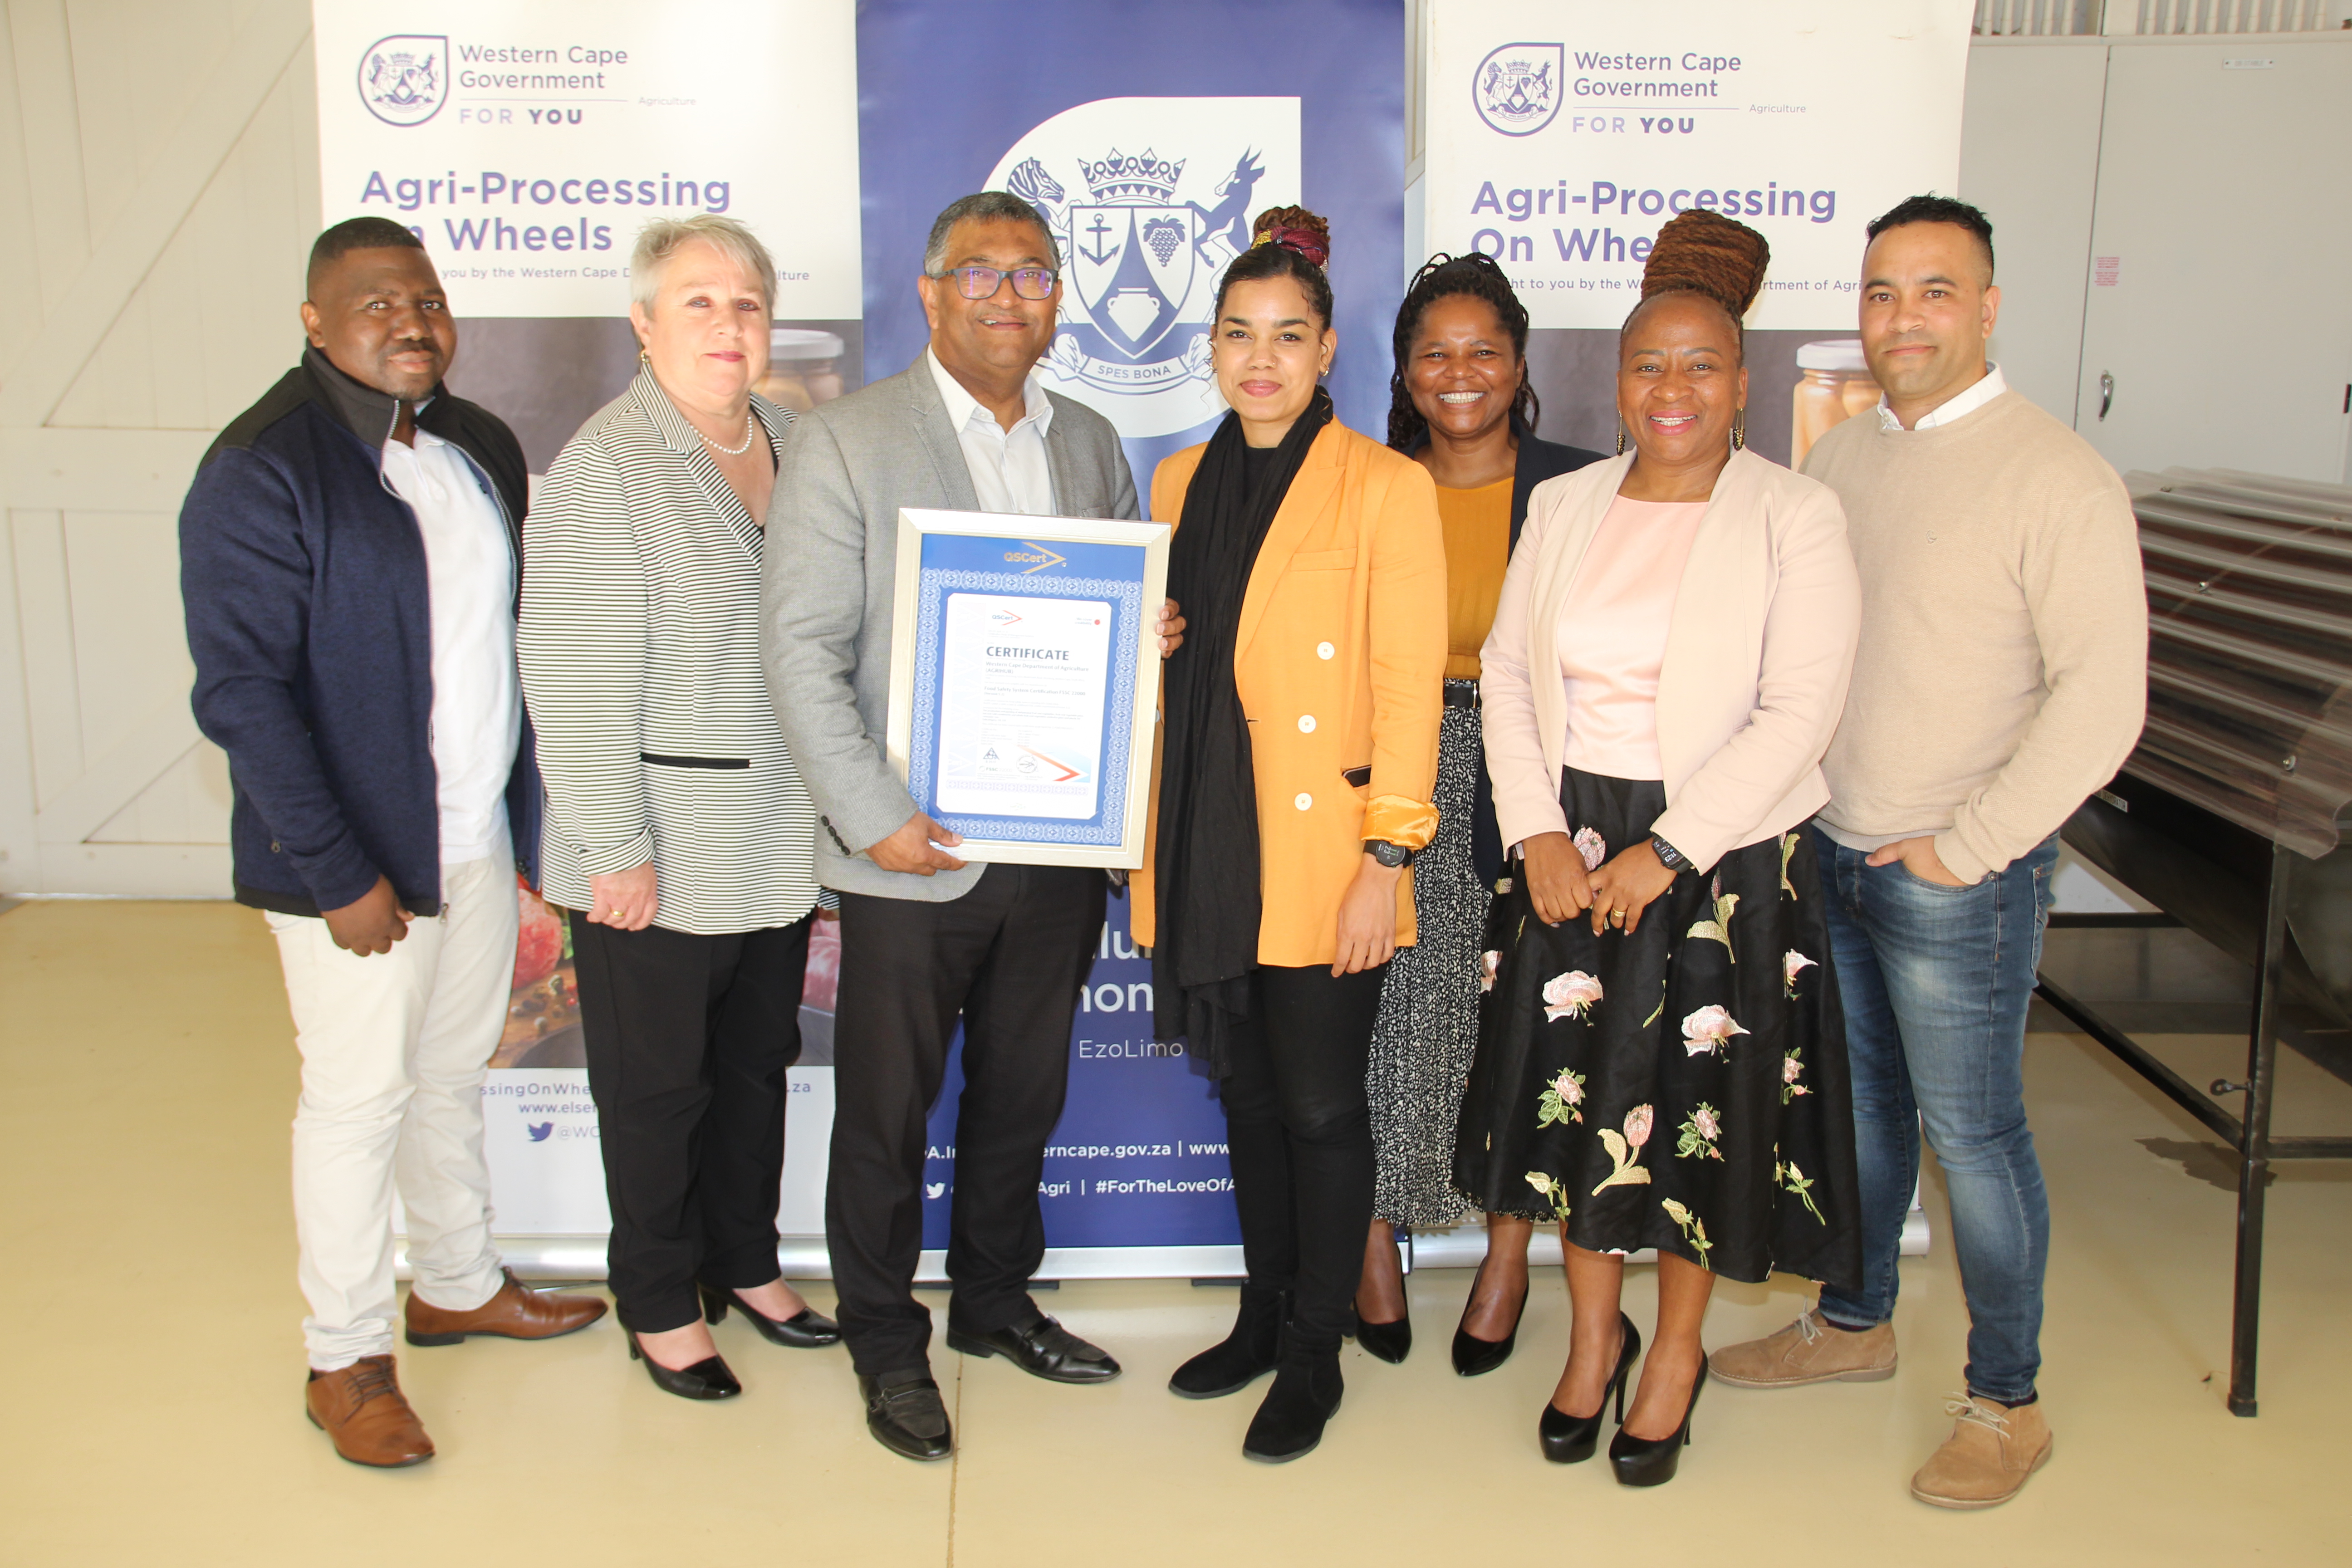 Mr Maliviwe Makeleni, Senior Economist, Dr Ilse Trautmann, Deputy Director-General: Agricultural Research and Regulatory Services, Mr Darryl Jacobs, Acting Head of Department, Terri-Lee Kammies, Lead Auditor and Certification Body Manager at QSCERT-SA, Lo